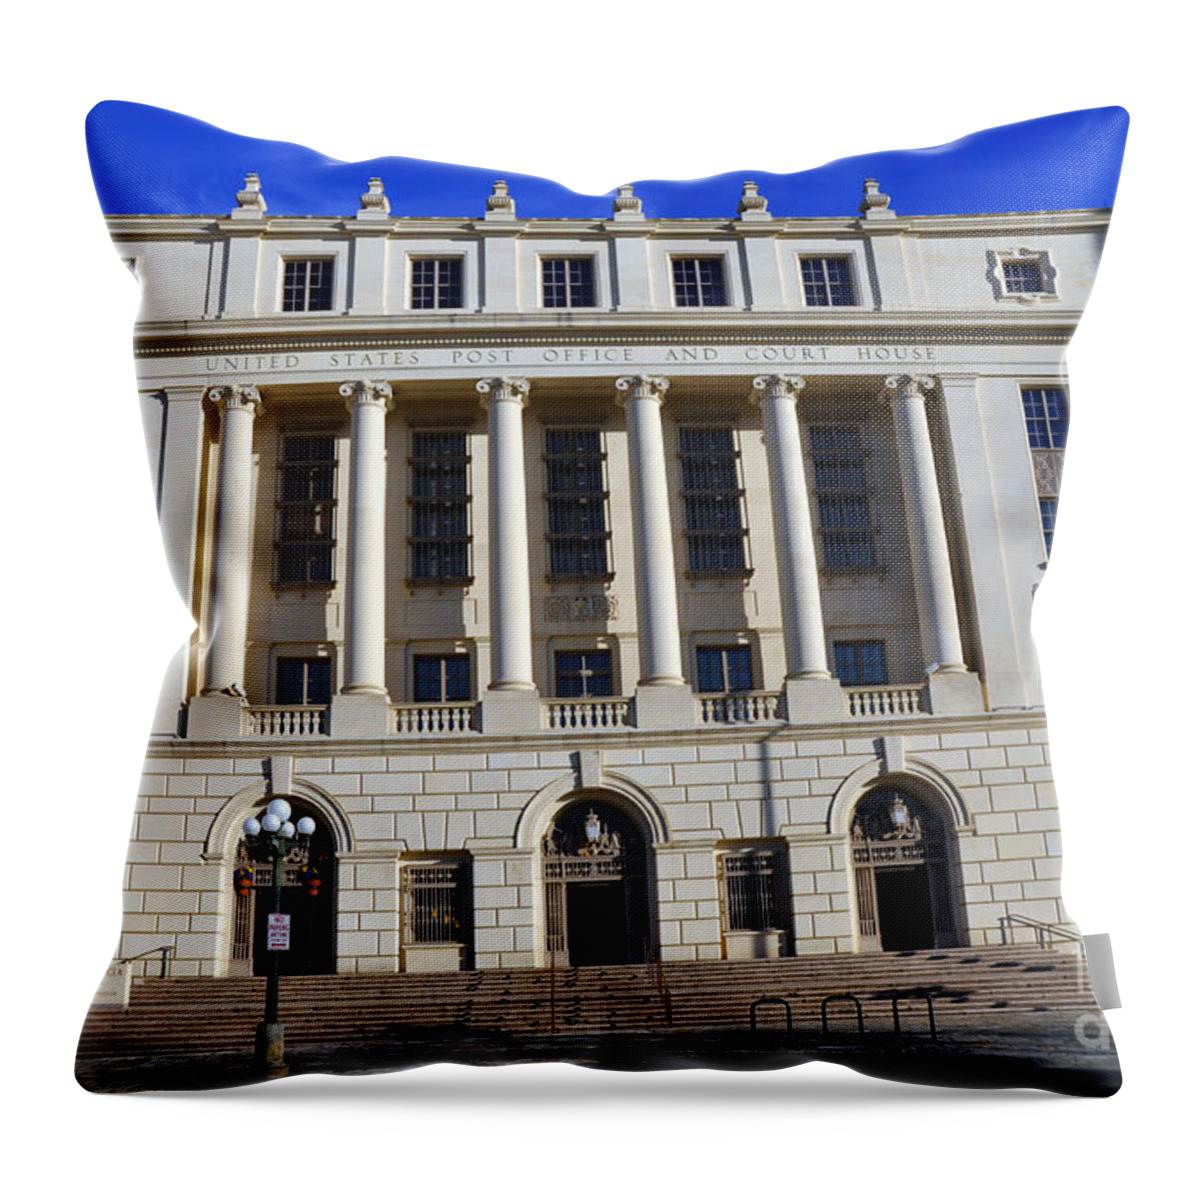 San Antonio Post Office Throw Pillow featuring the photograph San Antonio Post Office by Andrew Dinh